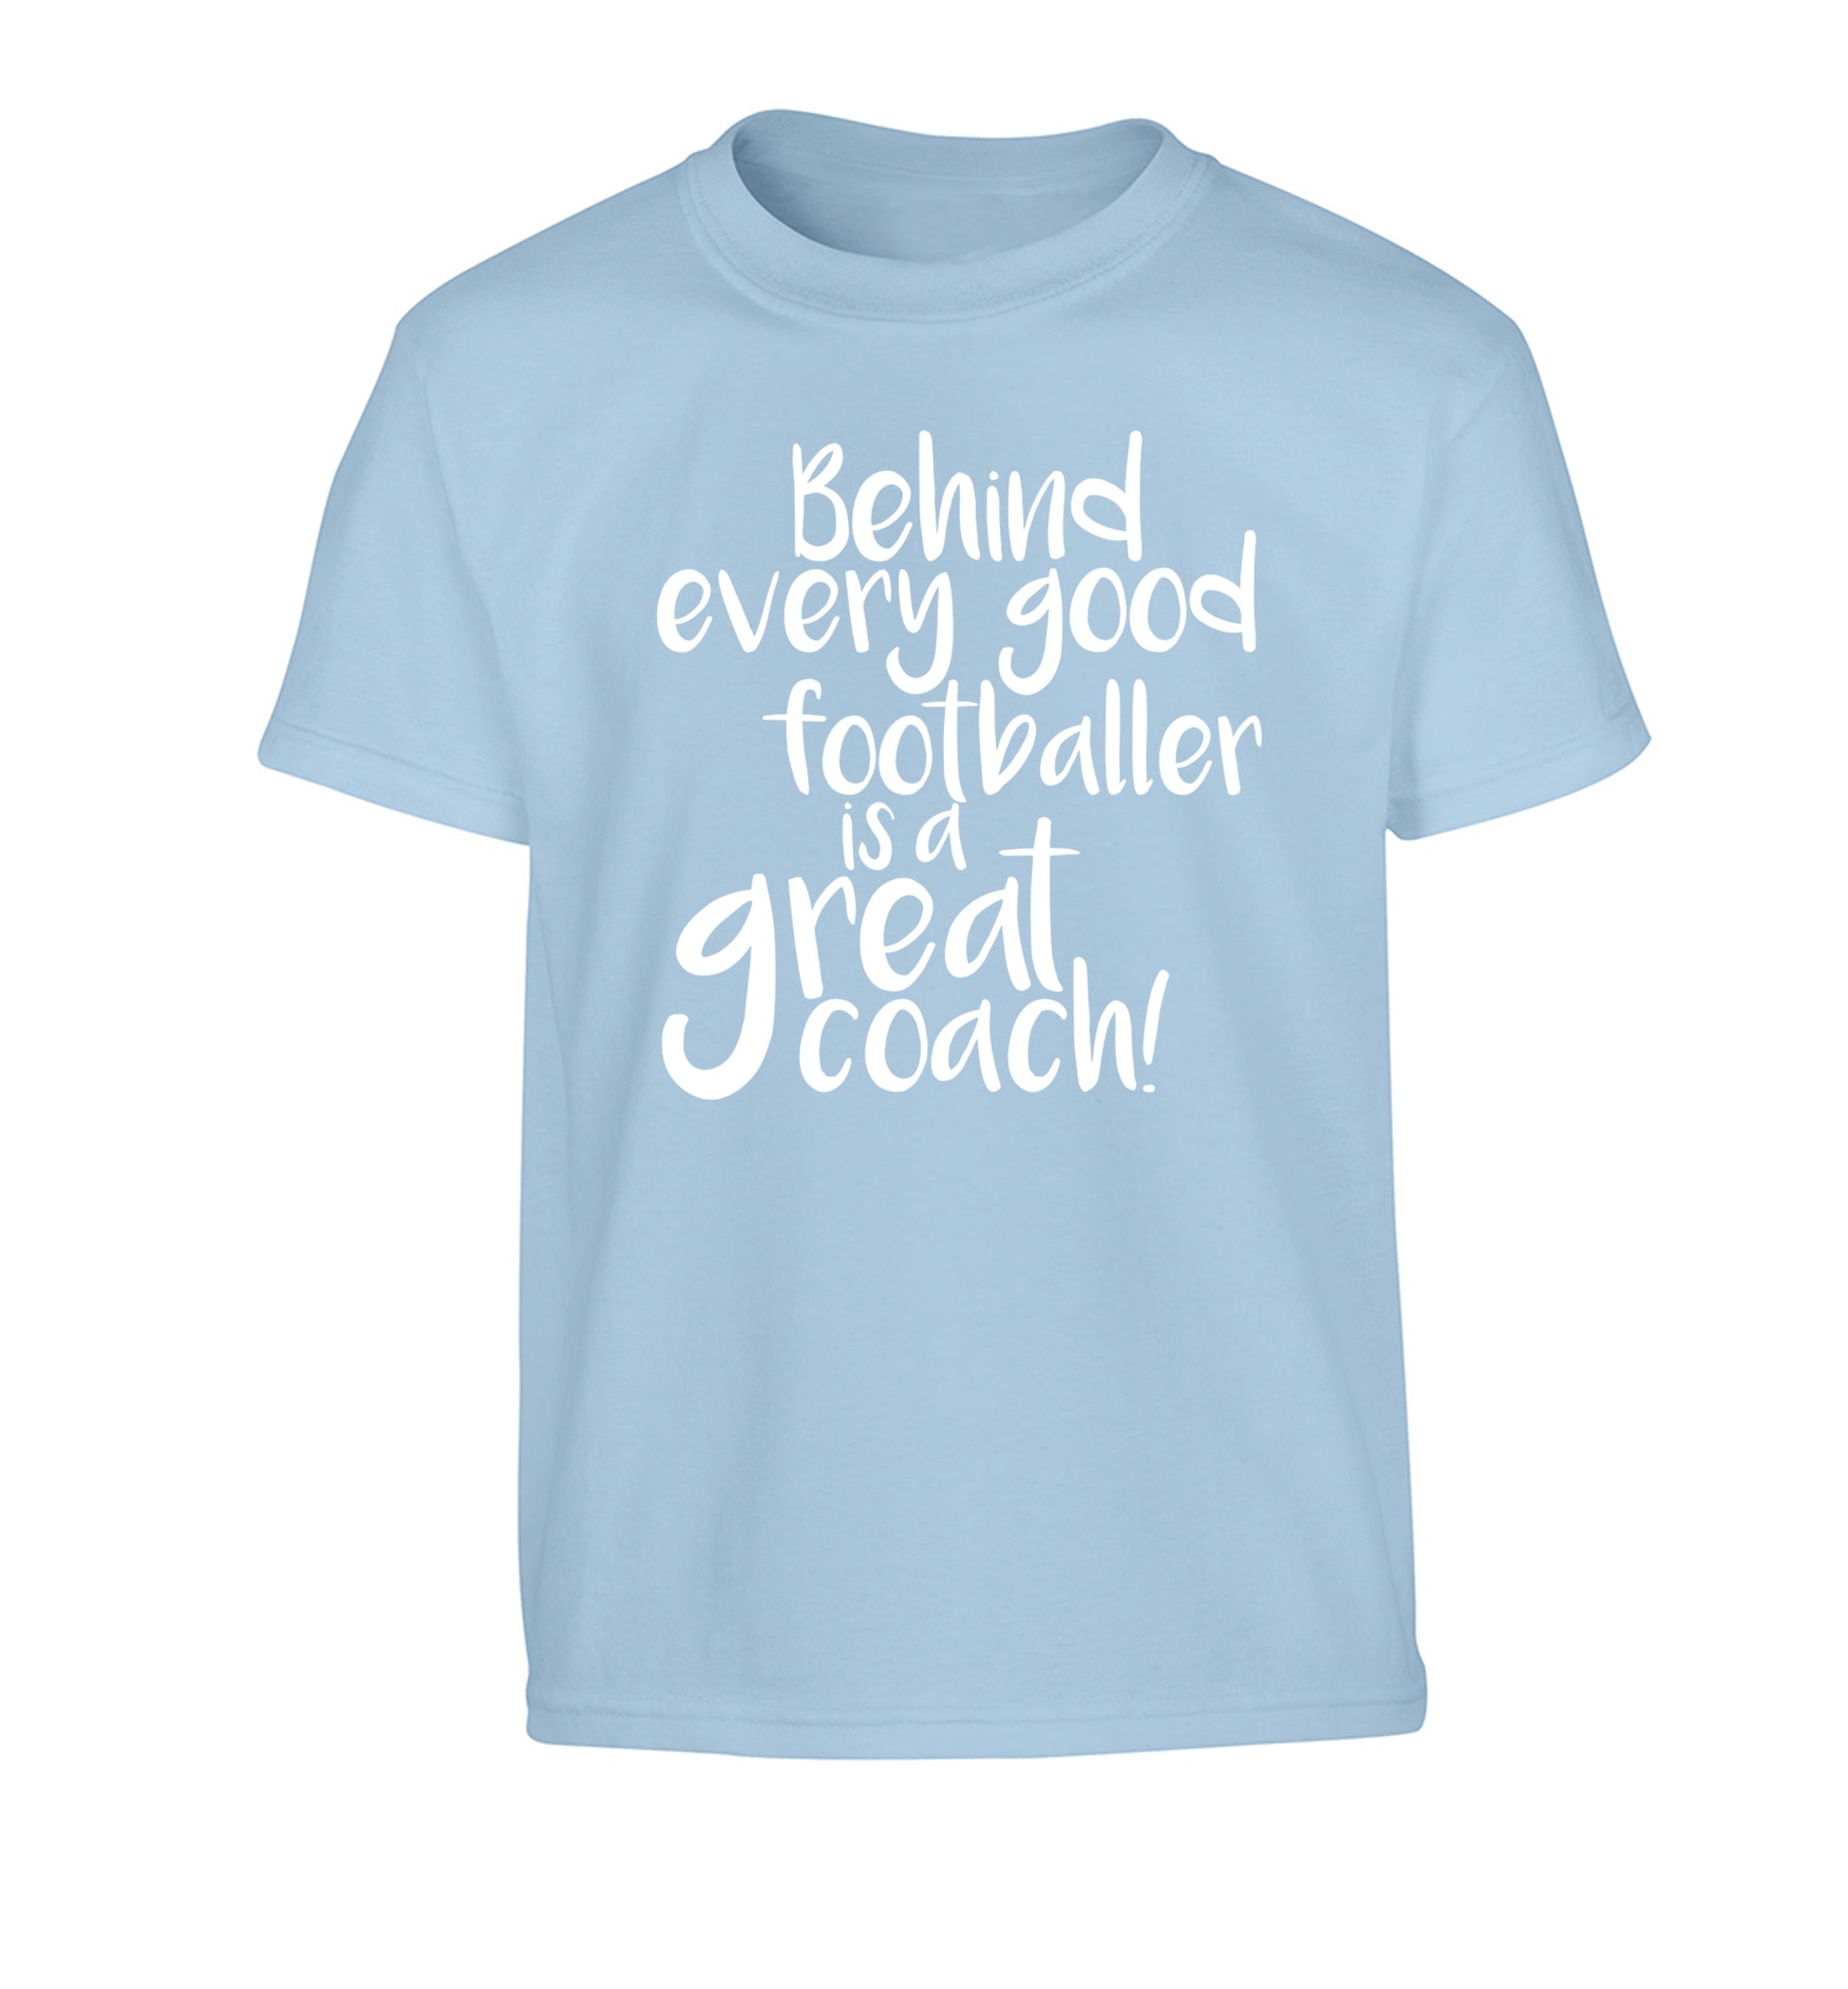 Behind every good footballer is a great coach! Children's light blue Tshirt 12-14 Years